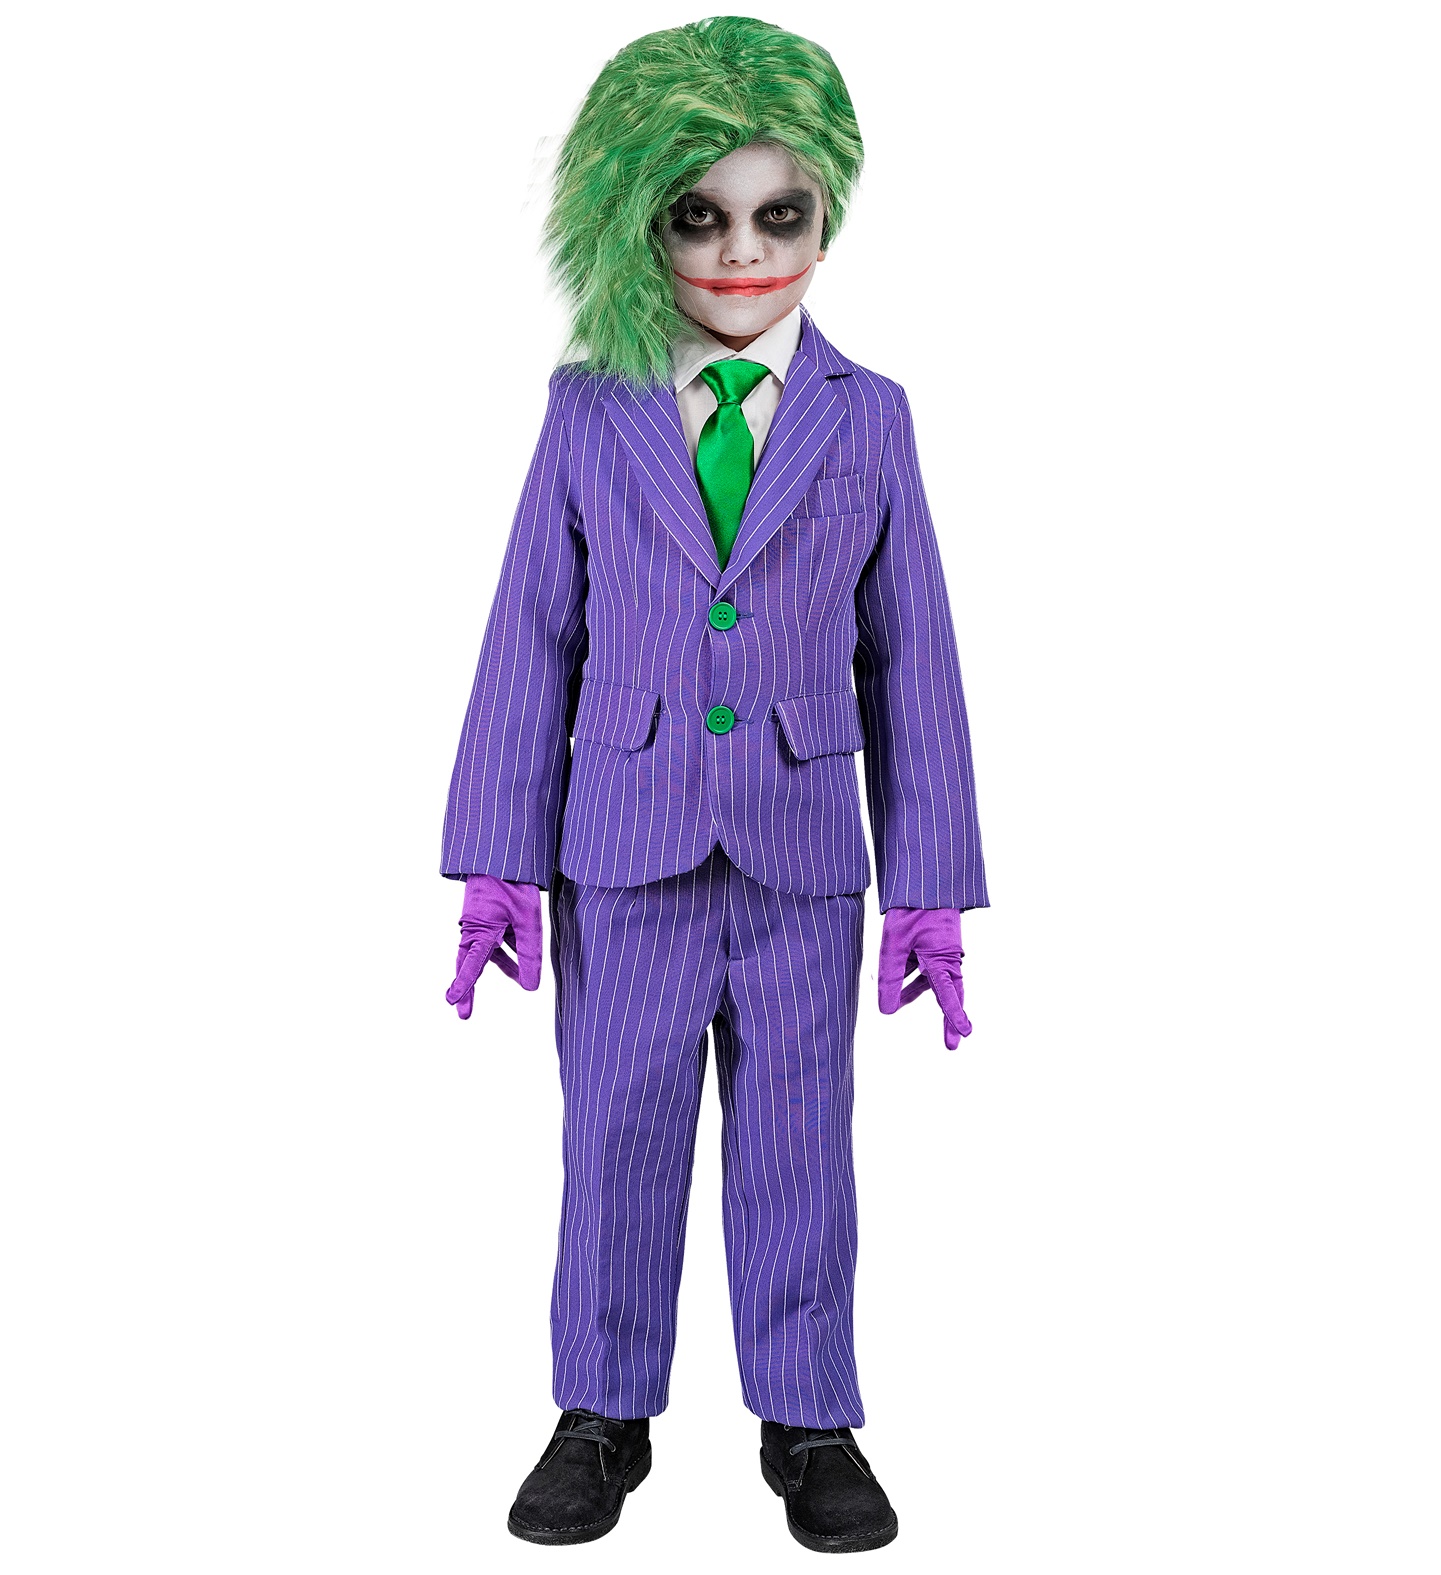 costume joker bambino - Bels Party S.r.l. Unipersonale